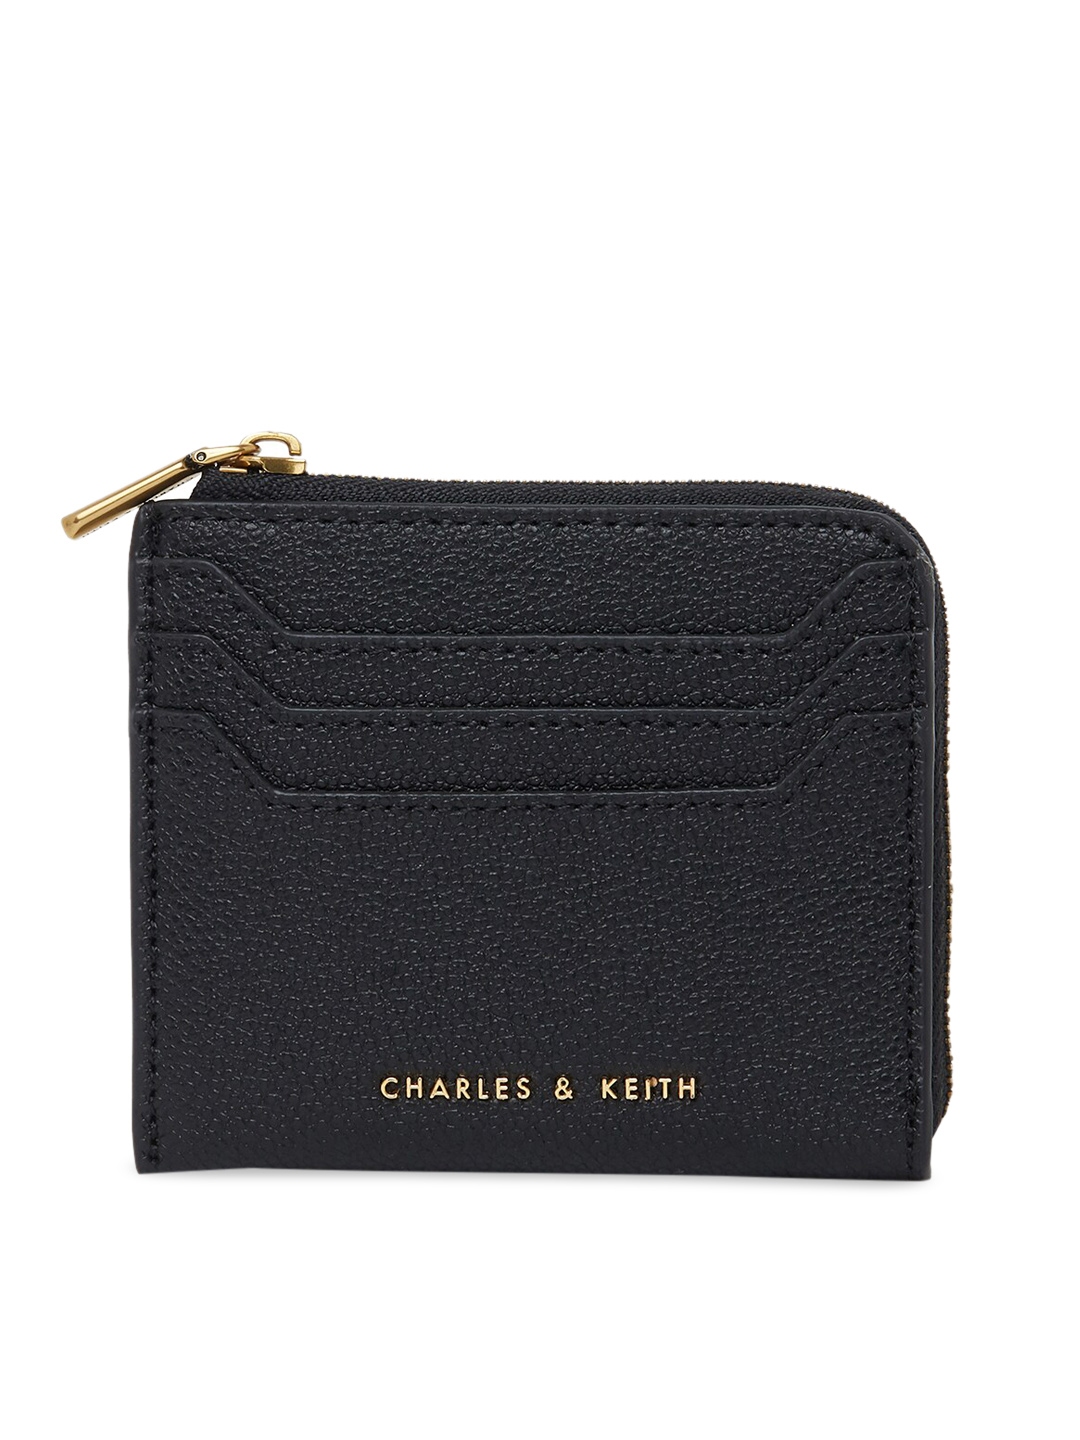 Buy CHARLES & KEITH Women Black Solid Zip Around Wallet - Wallets for